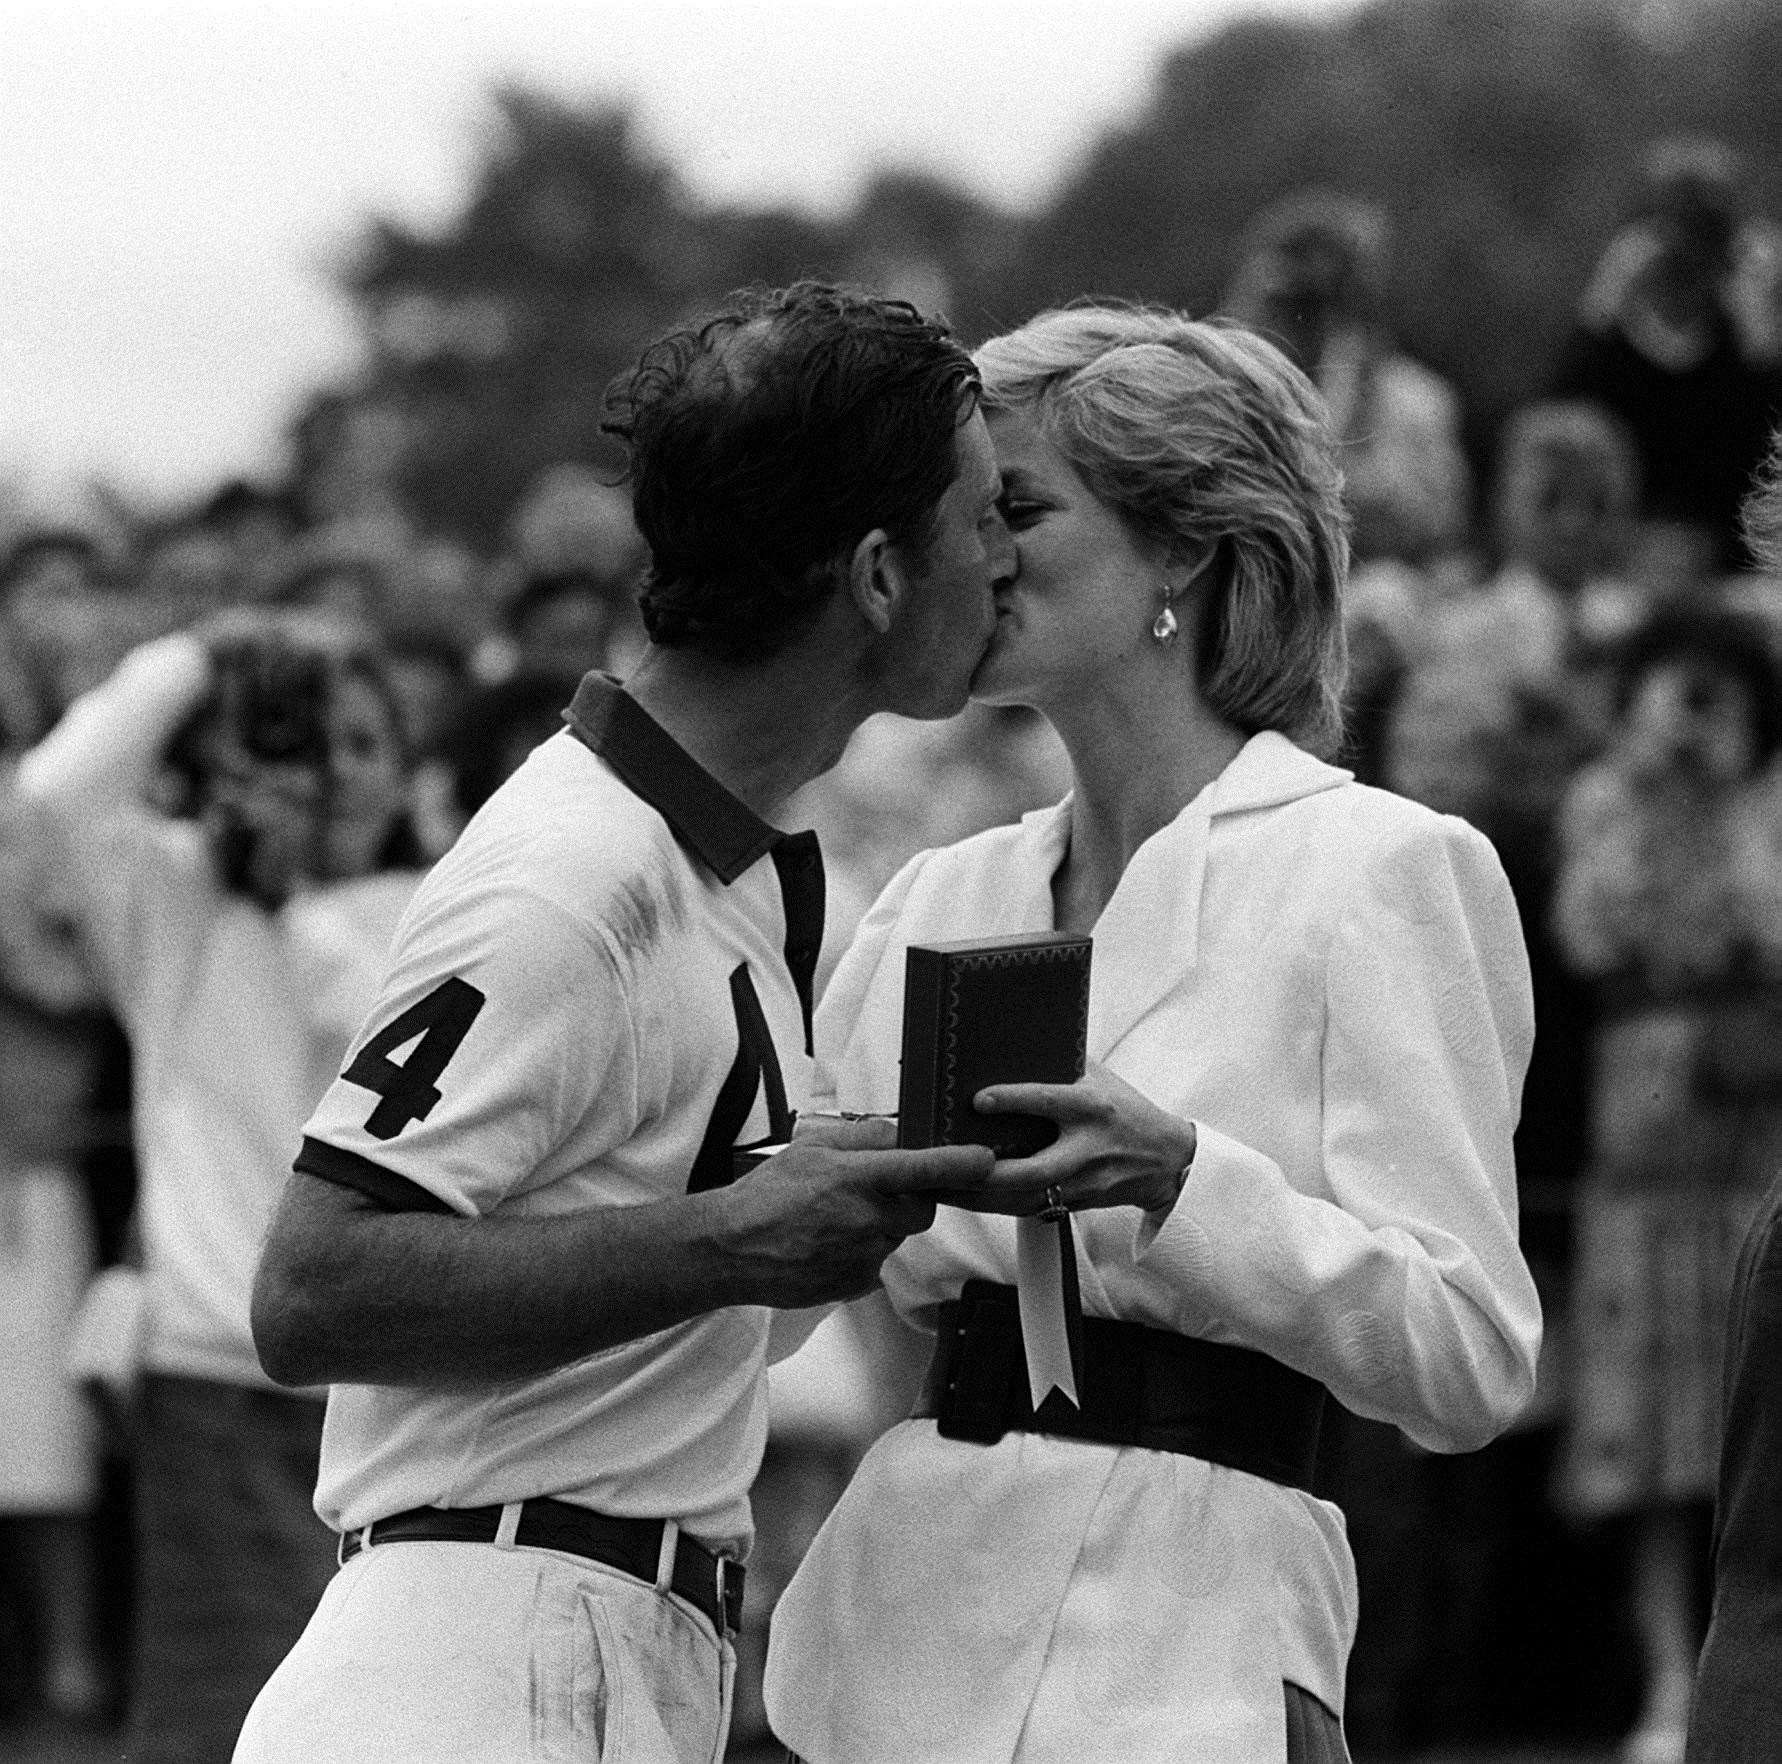 The Princess of Wales presenting her husband, the Prince of Wales, with a prize and a kiss after a polo match in 1986 (Ron Bell/PA)